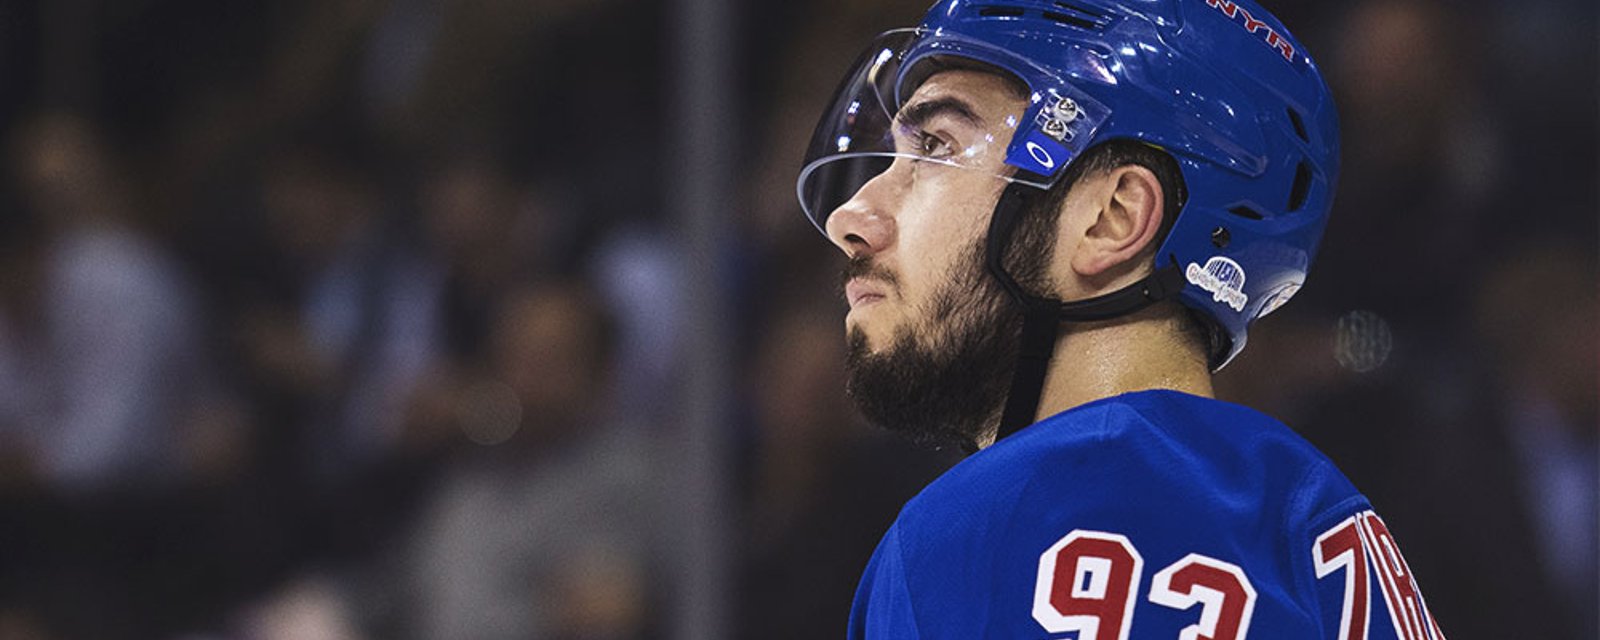 Breaking: Zibanejad signs MONSTER deal at the 11th hour